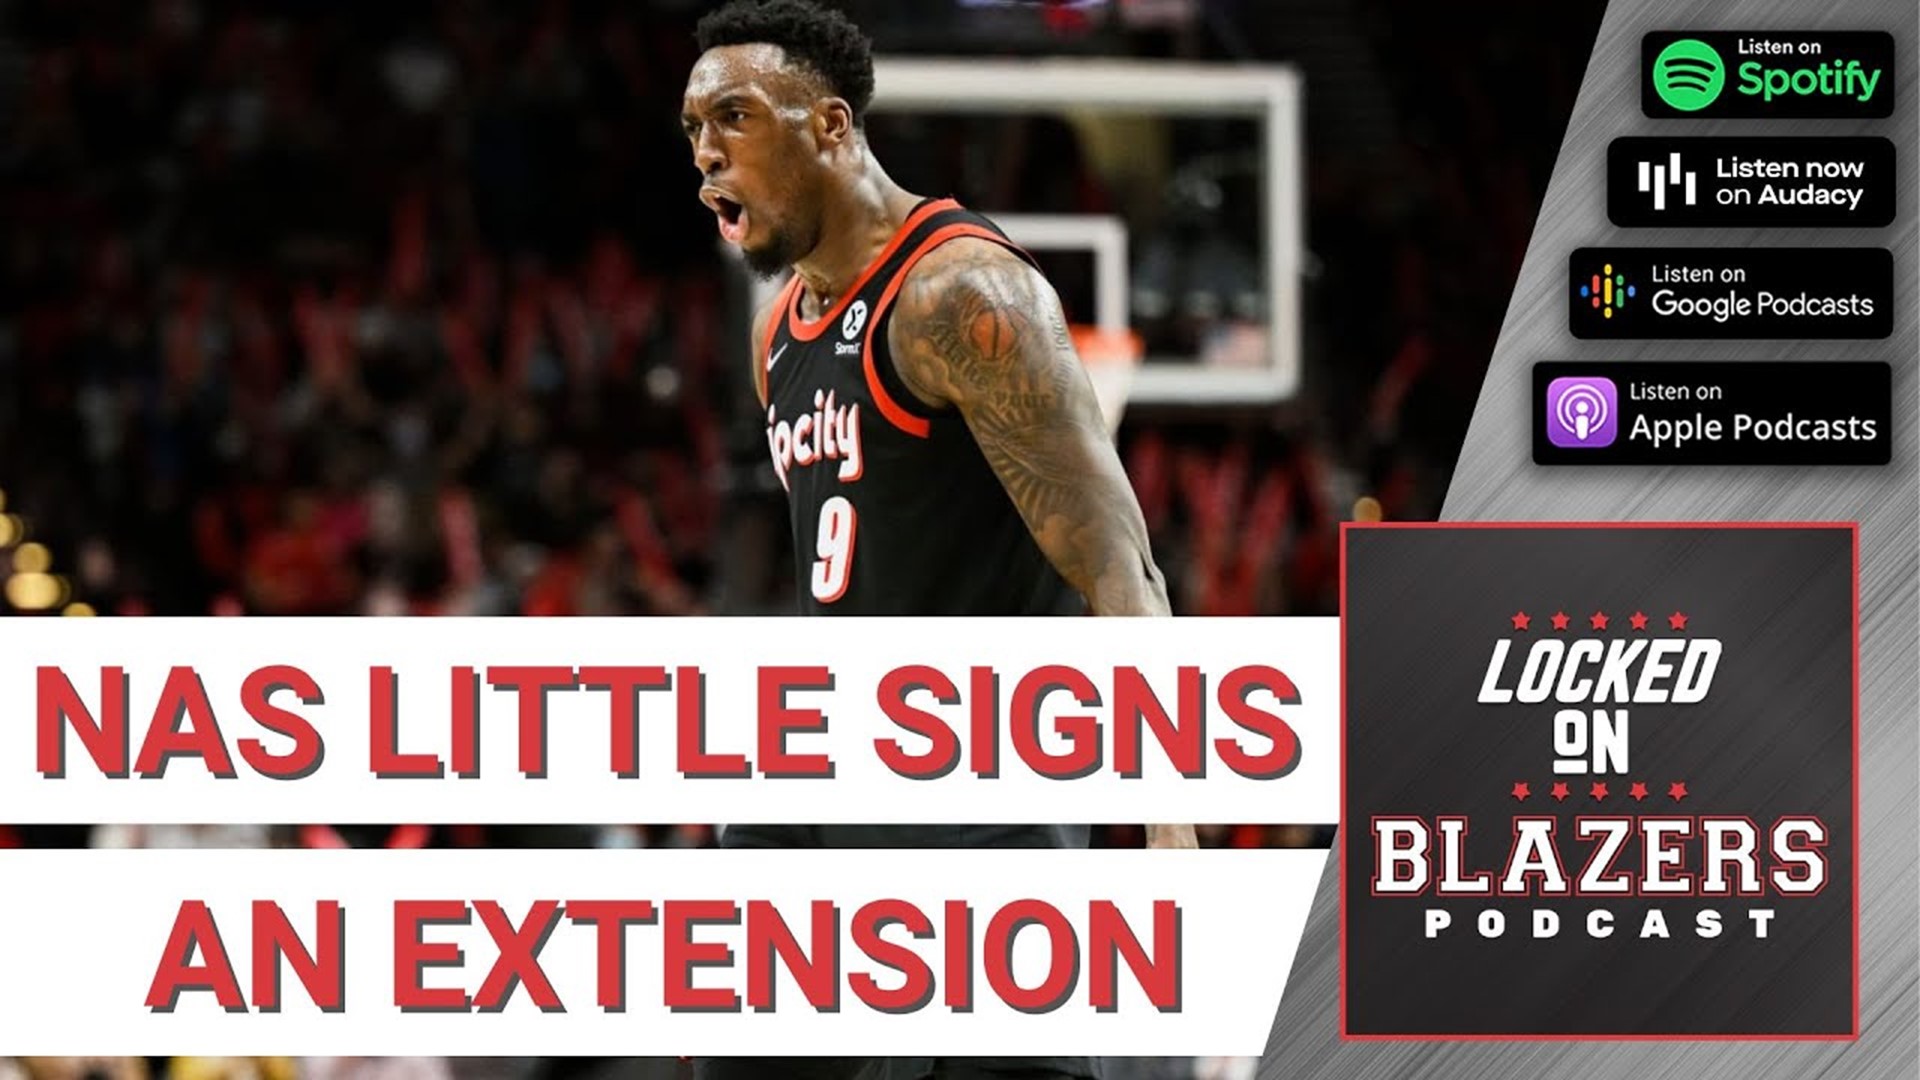 The Portland Trail Blazers signed Nassir Little to a four-year contract extension. It's a good deal for the team and some security for Little.